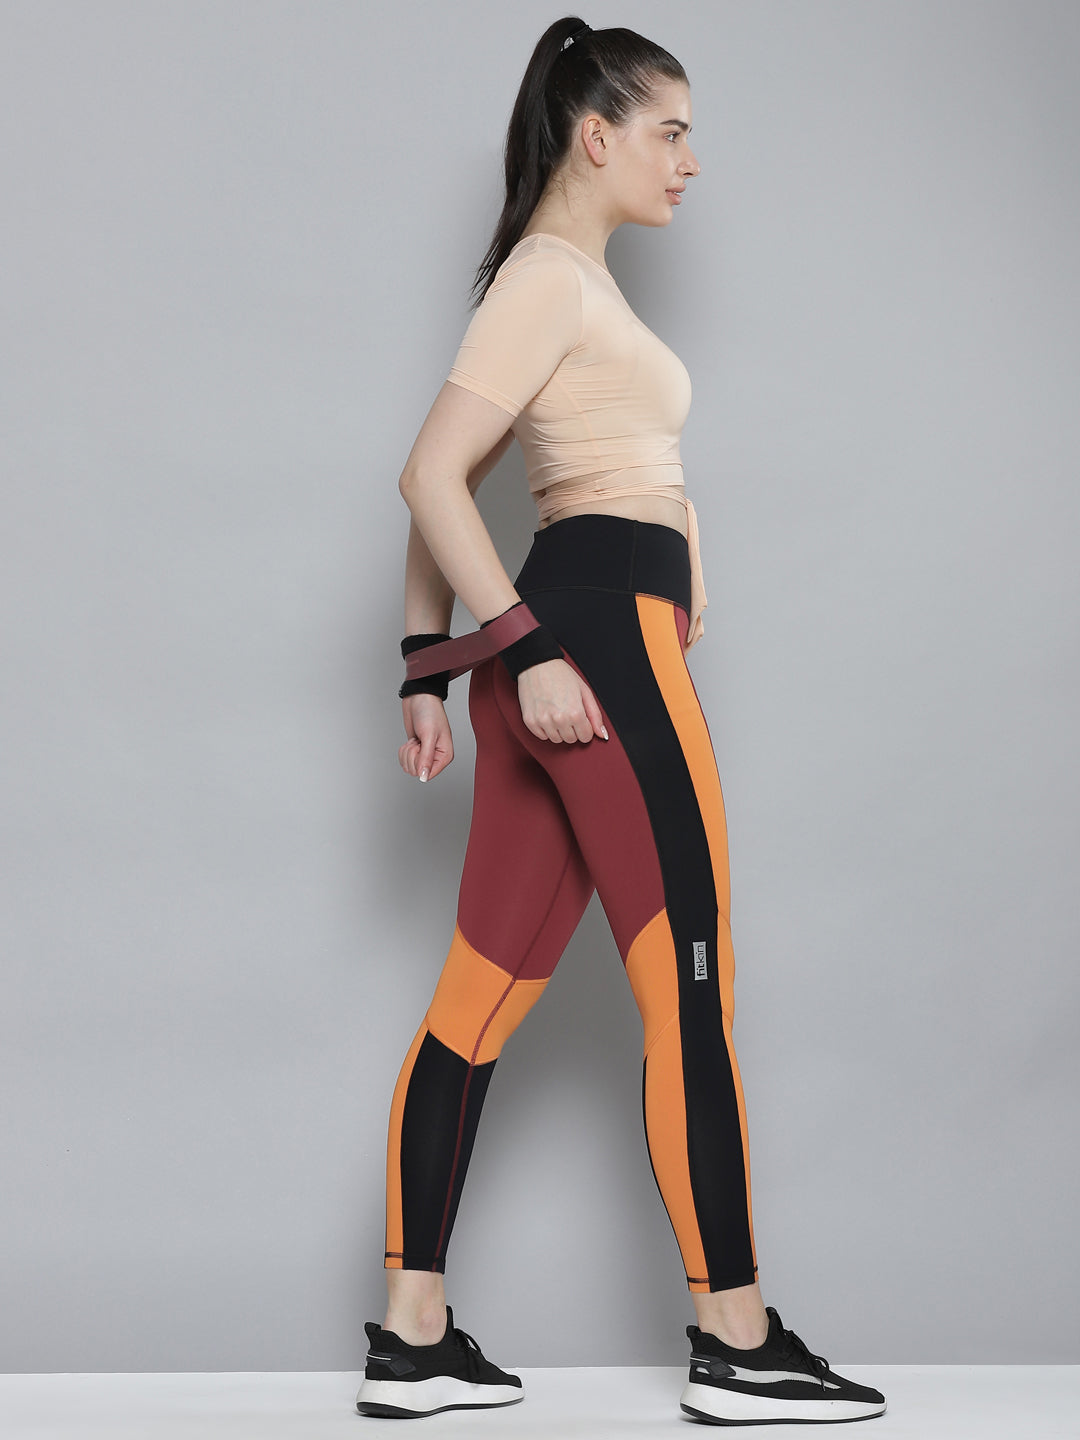 The 19 Best Workout Leggings For Women - FitOn